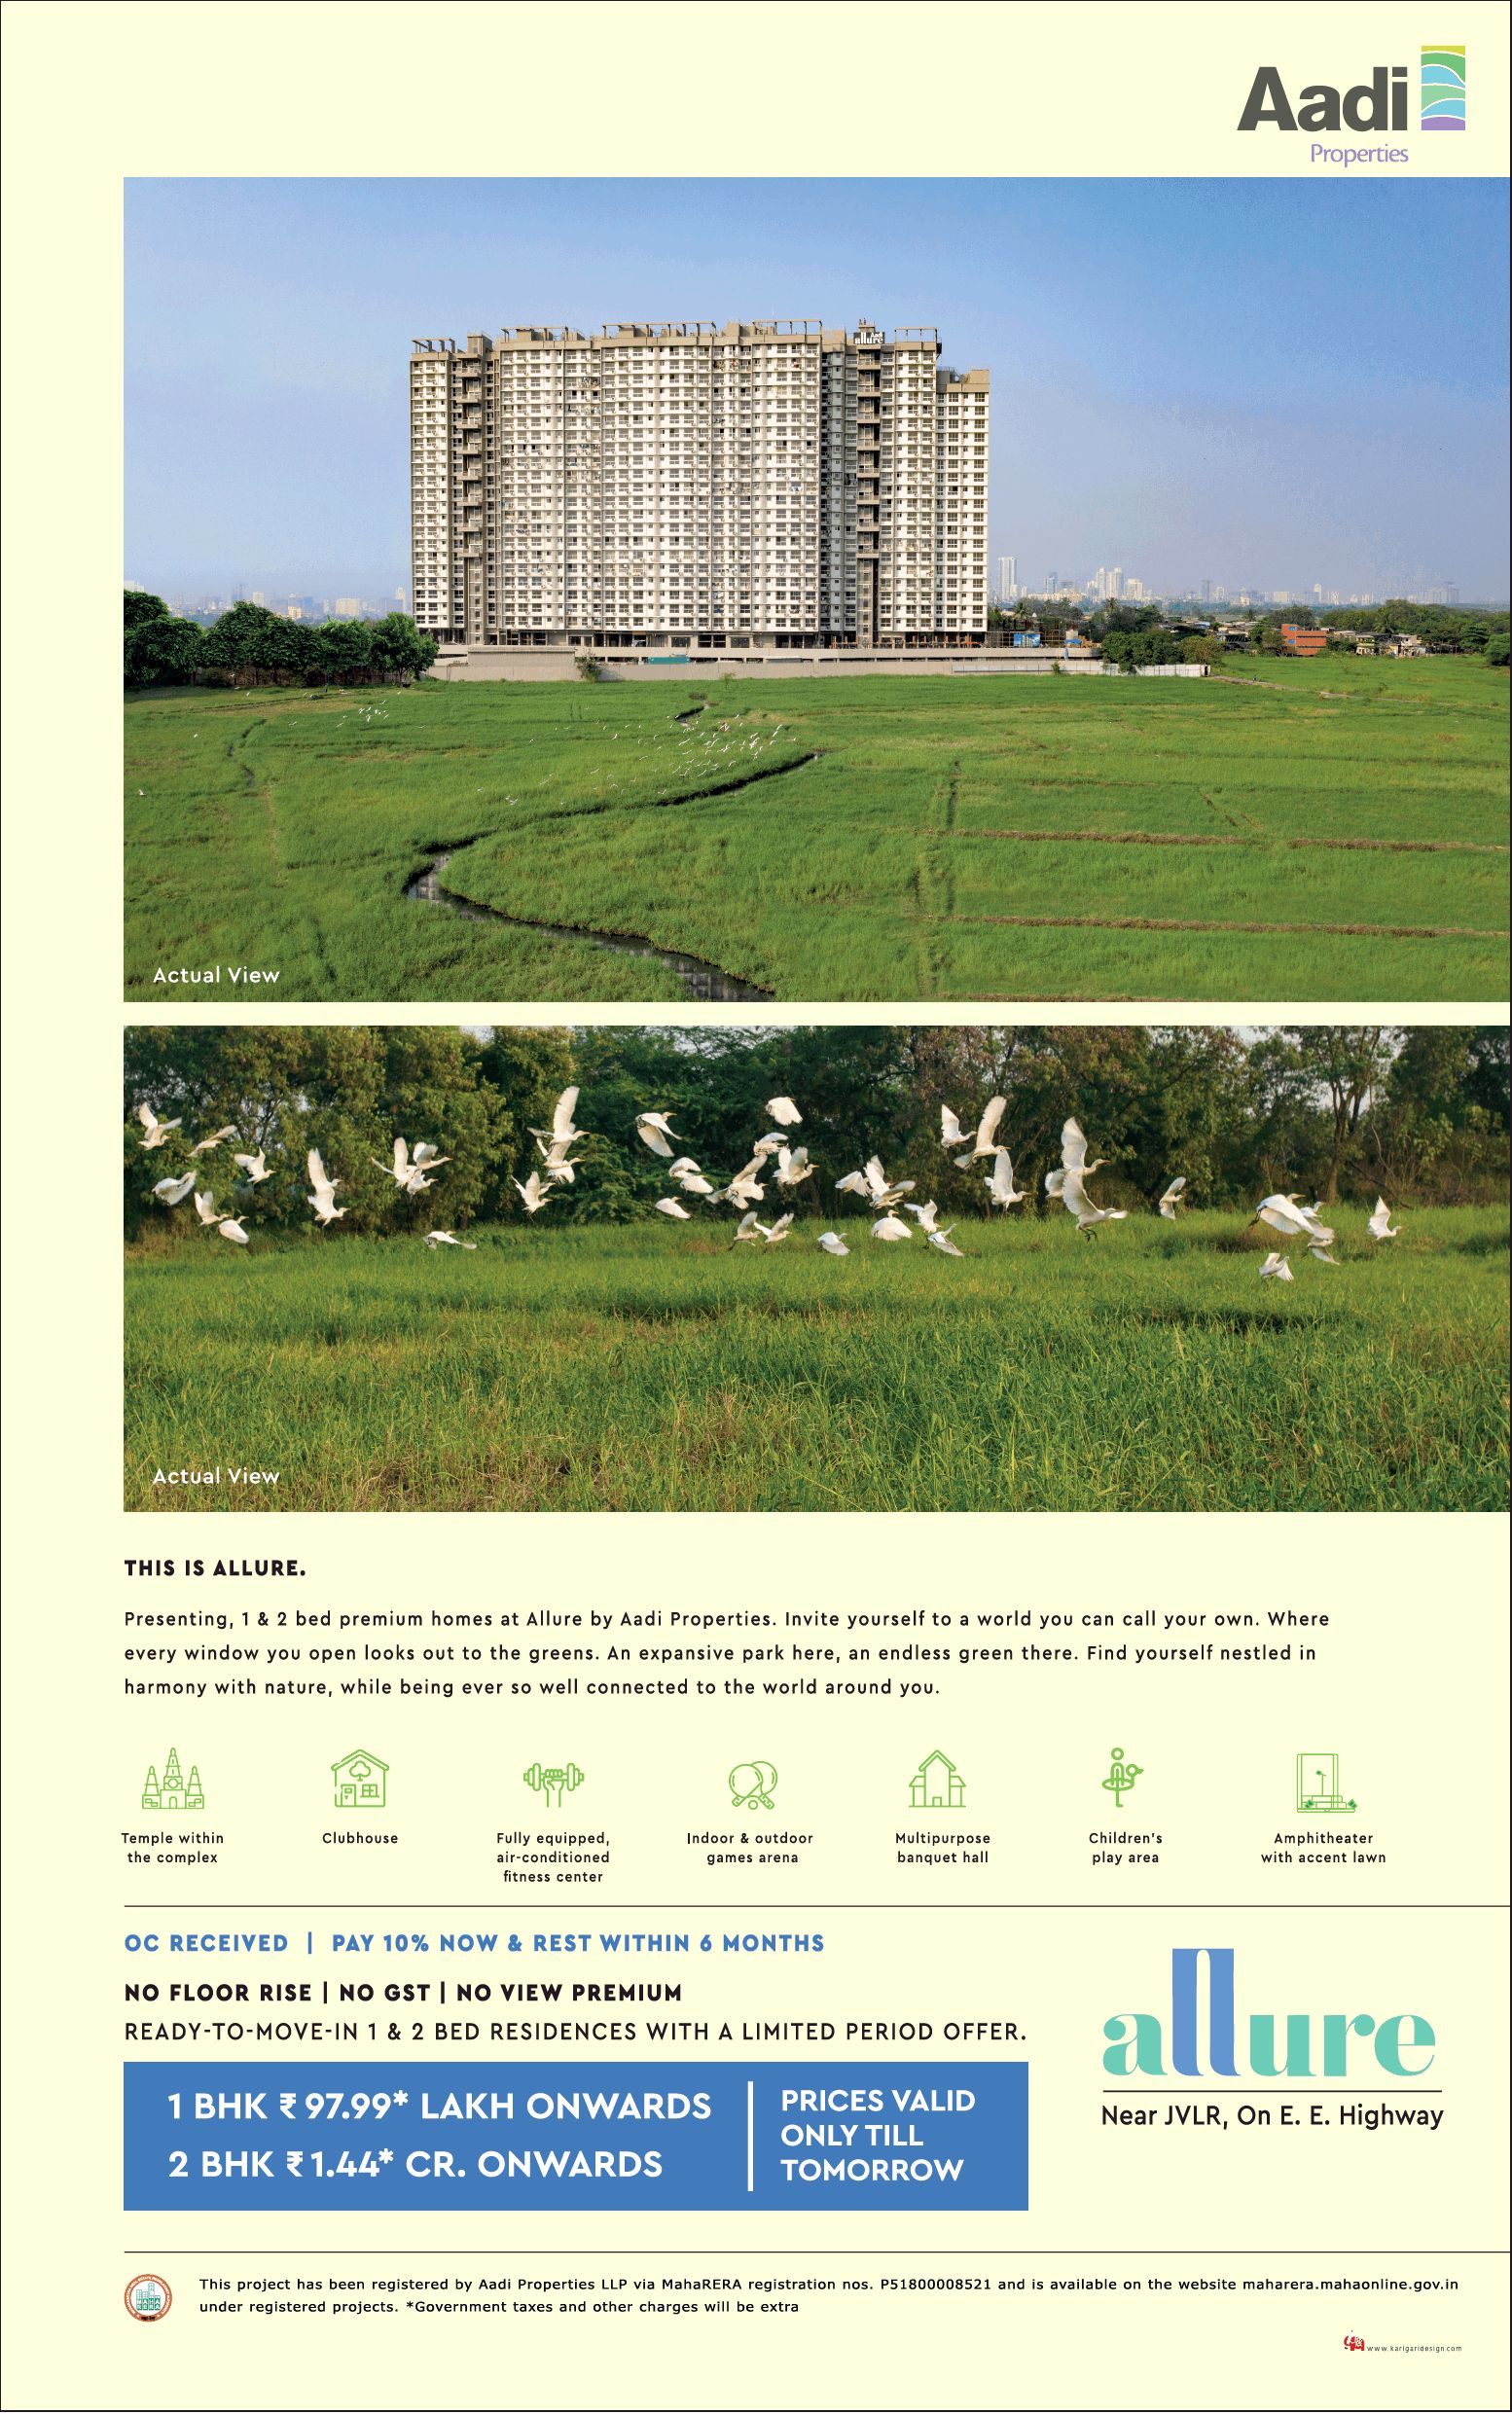 Ready-to-move-in 1 & 2 bed residences starting Rs 97.99 Lac at Aadi Allure, Mumbai